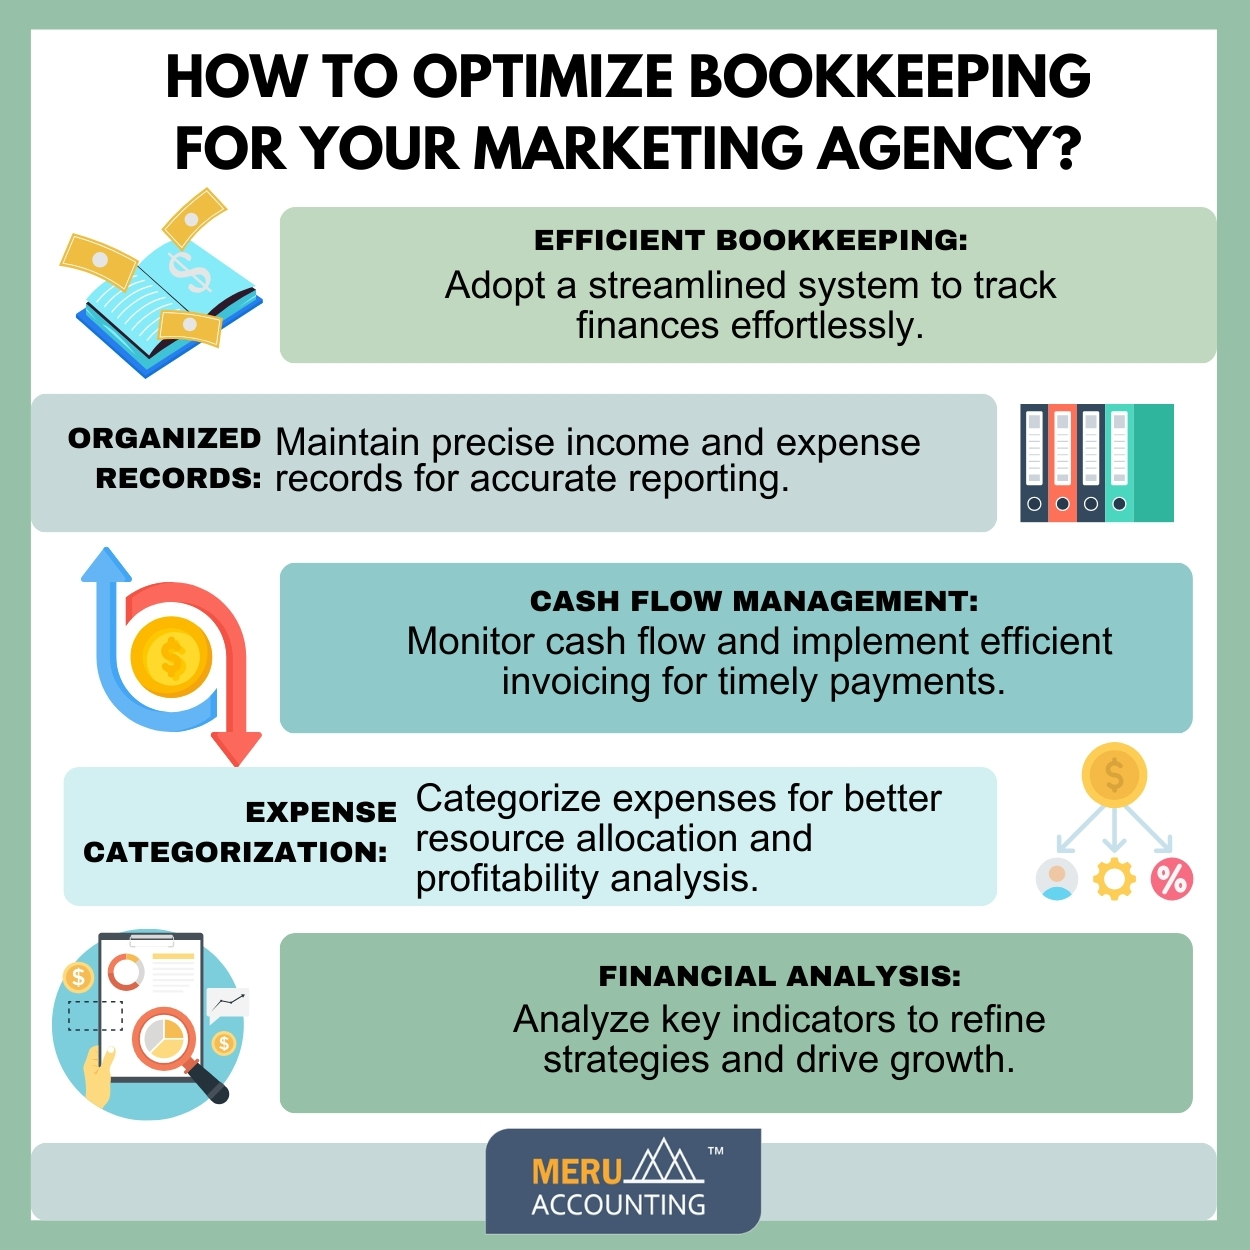 How to Optimize Bookkeeping for Your Marketing Agency 1250 by 1250 1